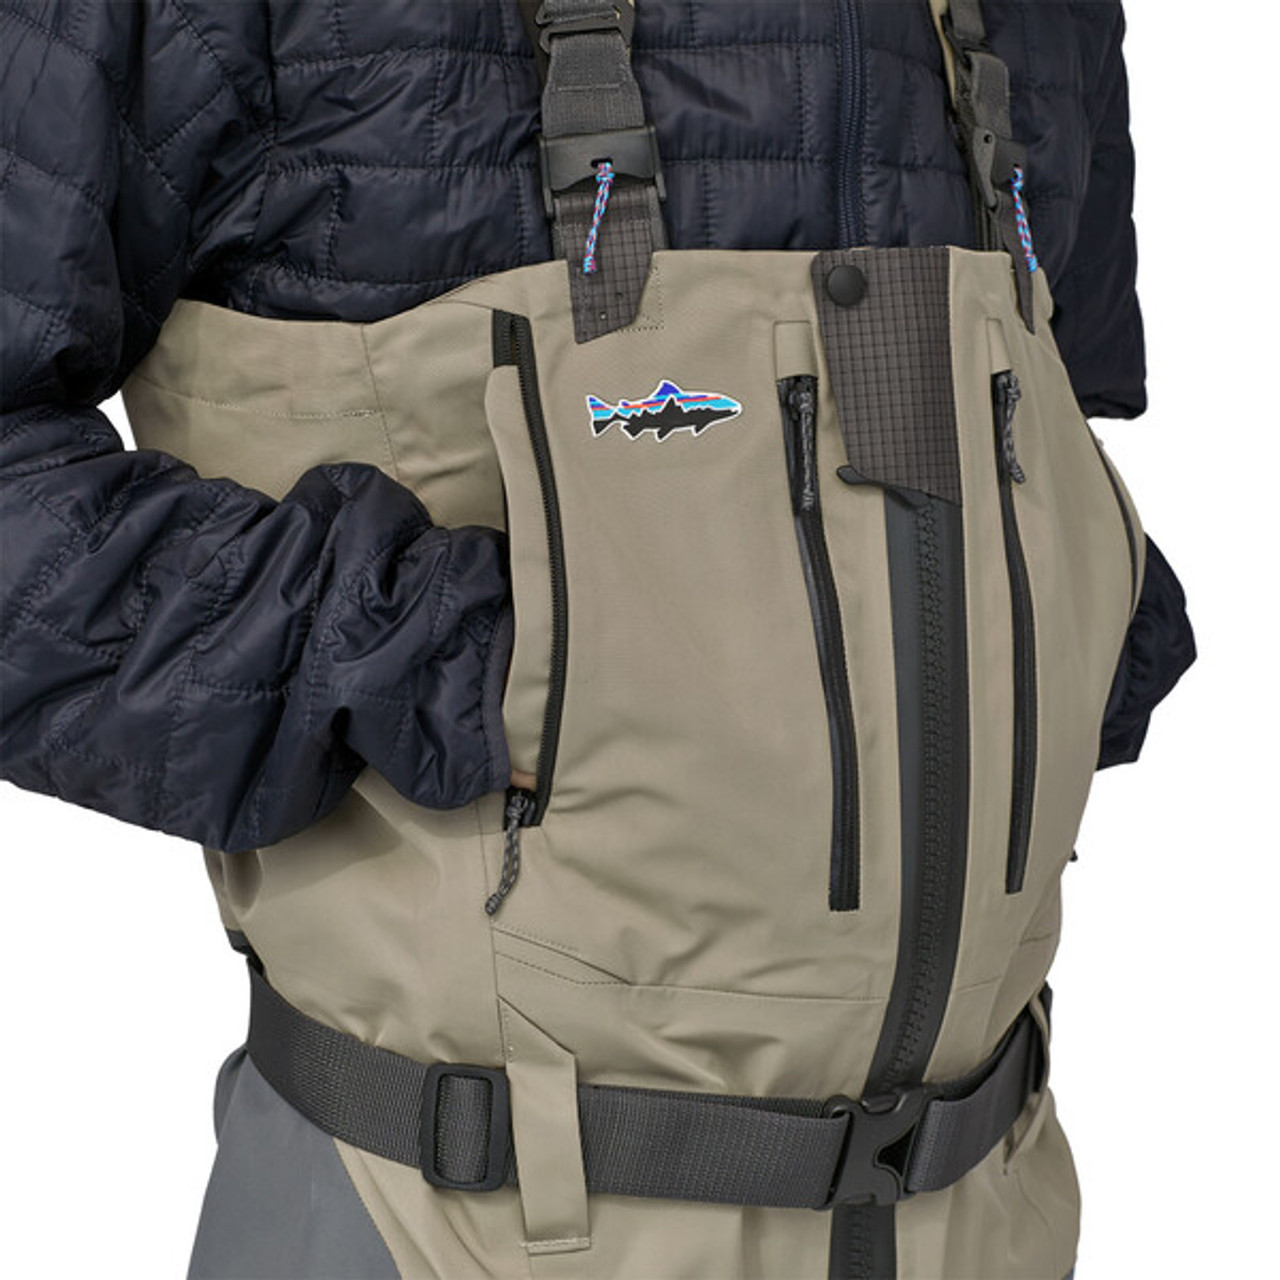 https://cdn11.bigcommerce.com/s-gxthzko3a6/images/stencil/1280x1280/products/973/56784/patagonia-mens-swiftcurrent-expedition-zip-front-waders-pocket__89487.1705610902.jpg?c=1